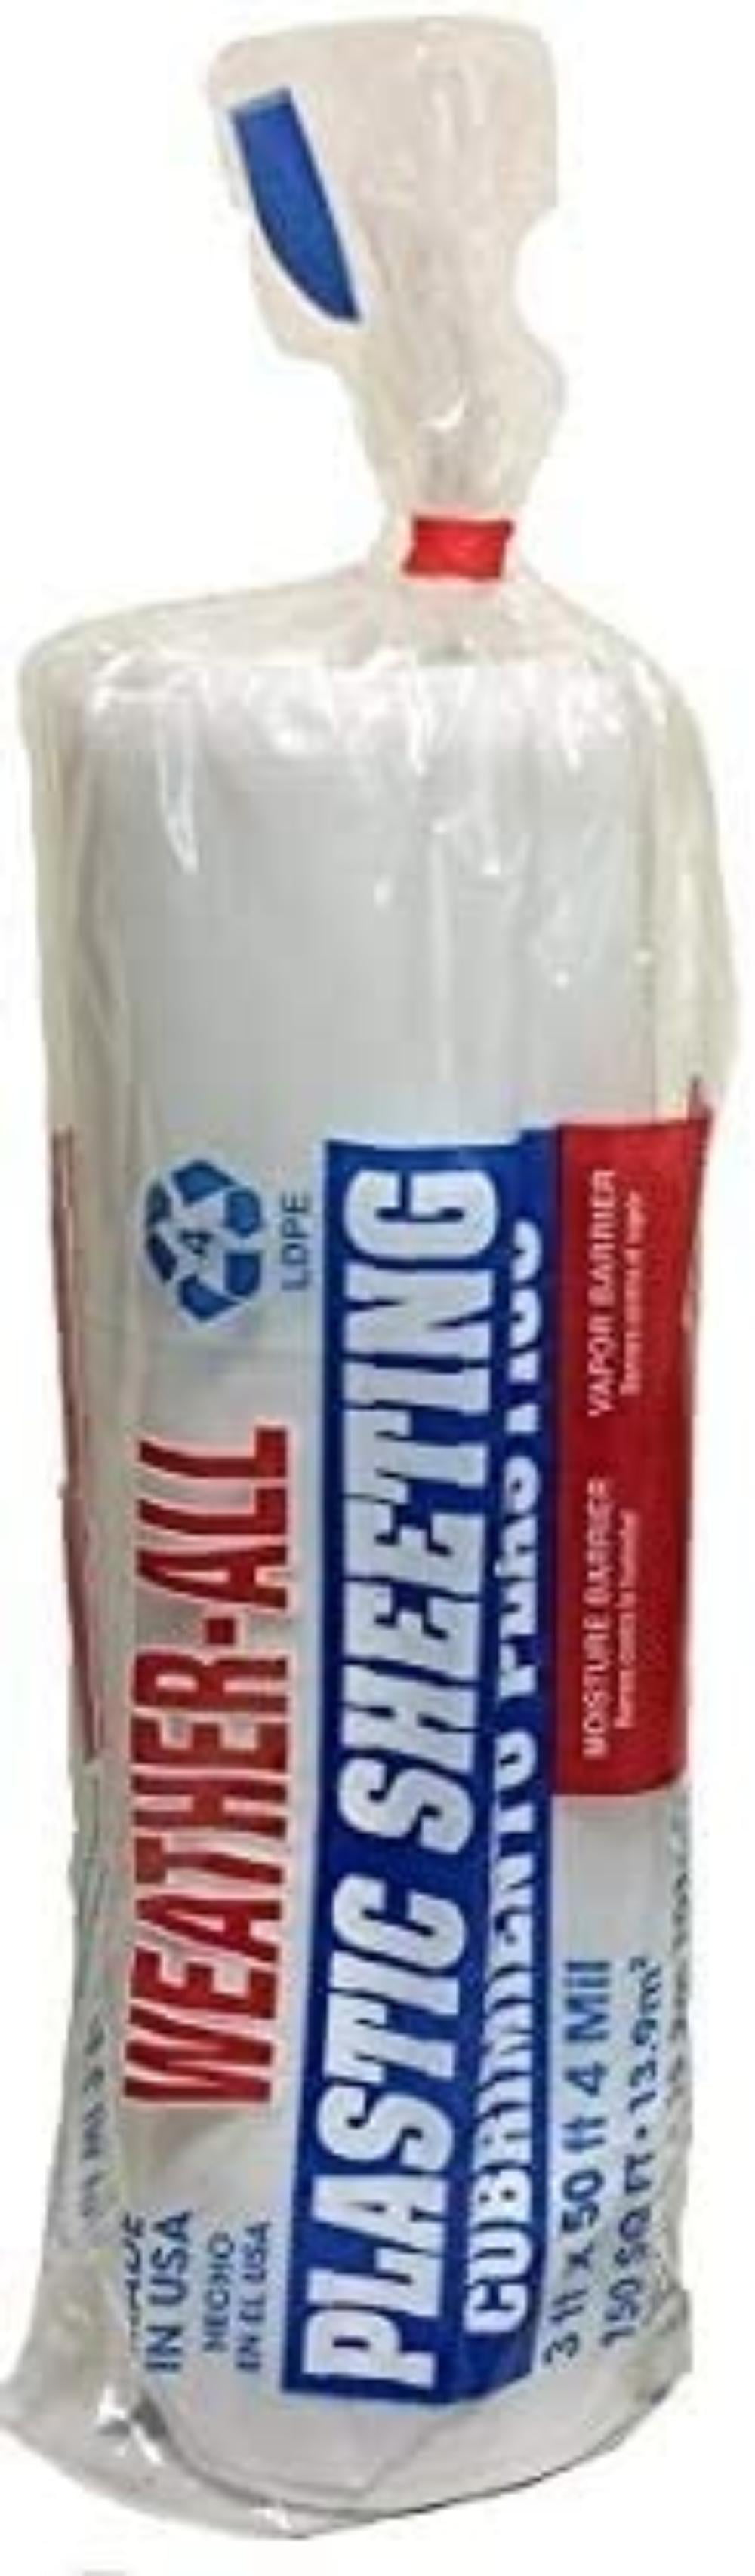 Plastic Sheeting Drop Cloth 3 inch Wide x 50 inch Length x 4.0 mil 